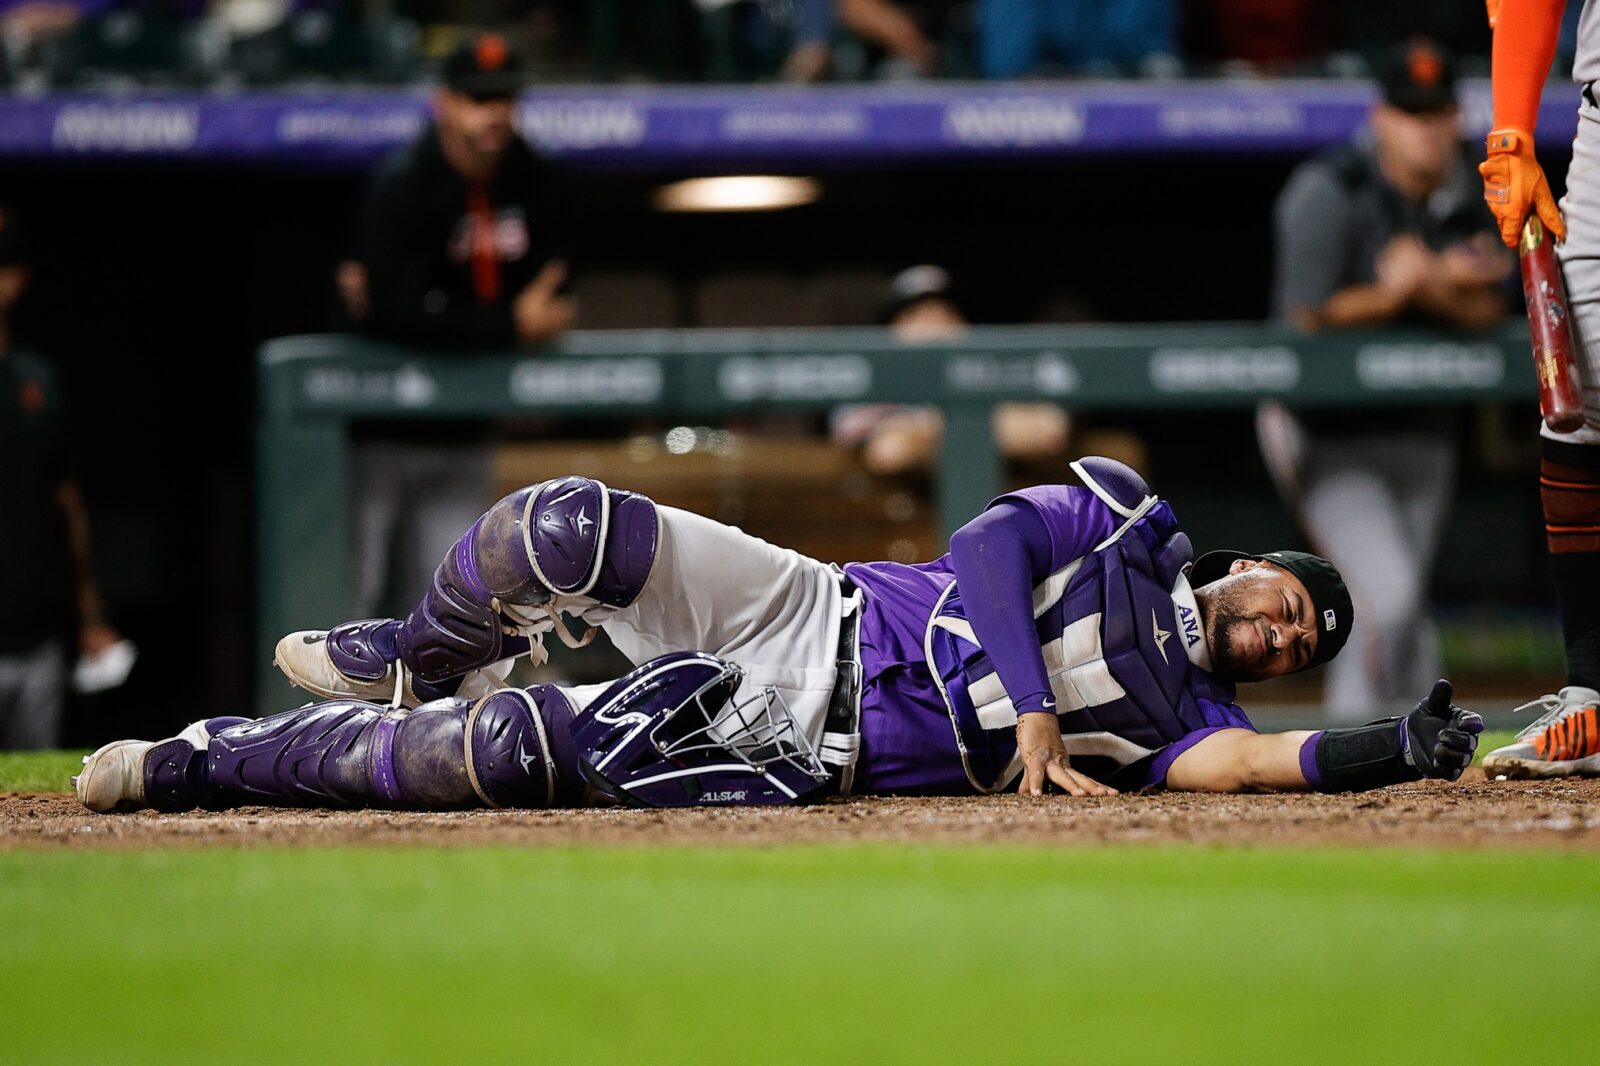 Colorado Rockies catchers not providing the power they were supposed to